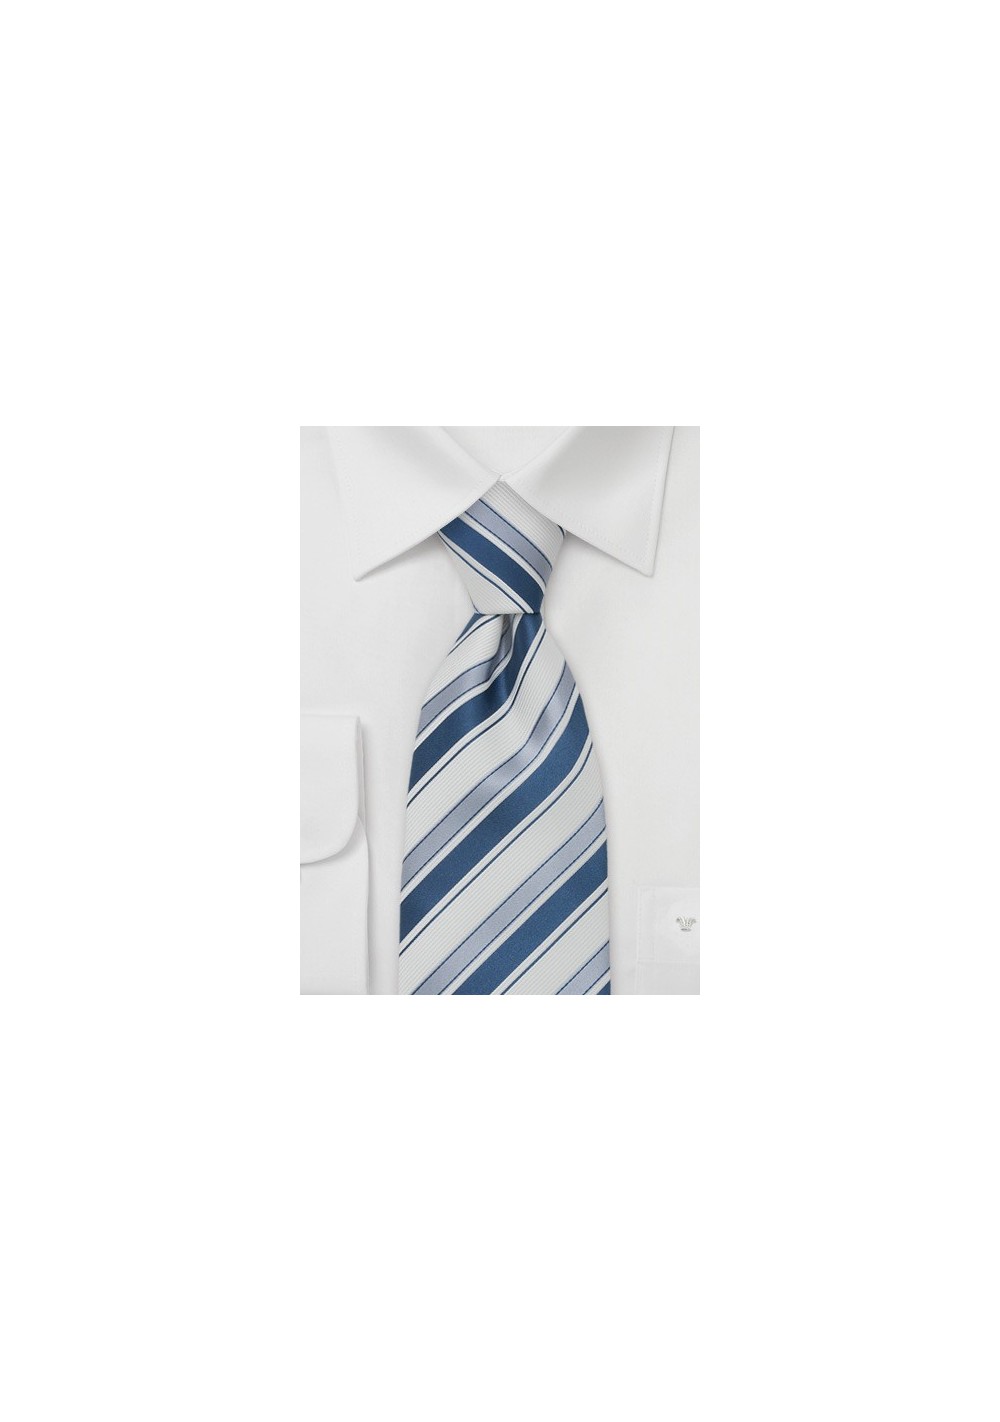 Striped Silk Tie in Light Blue, Sapphire, and White